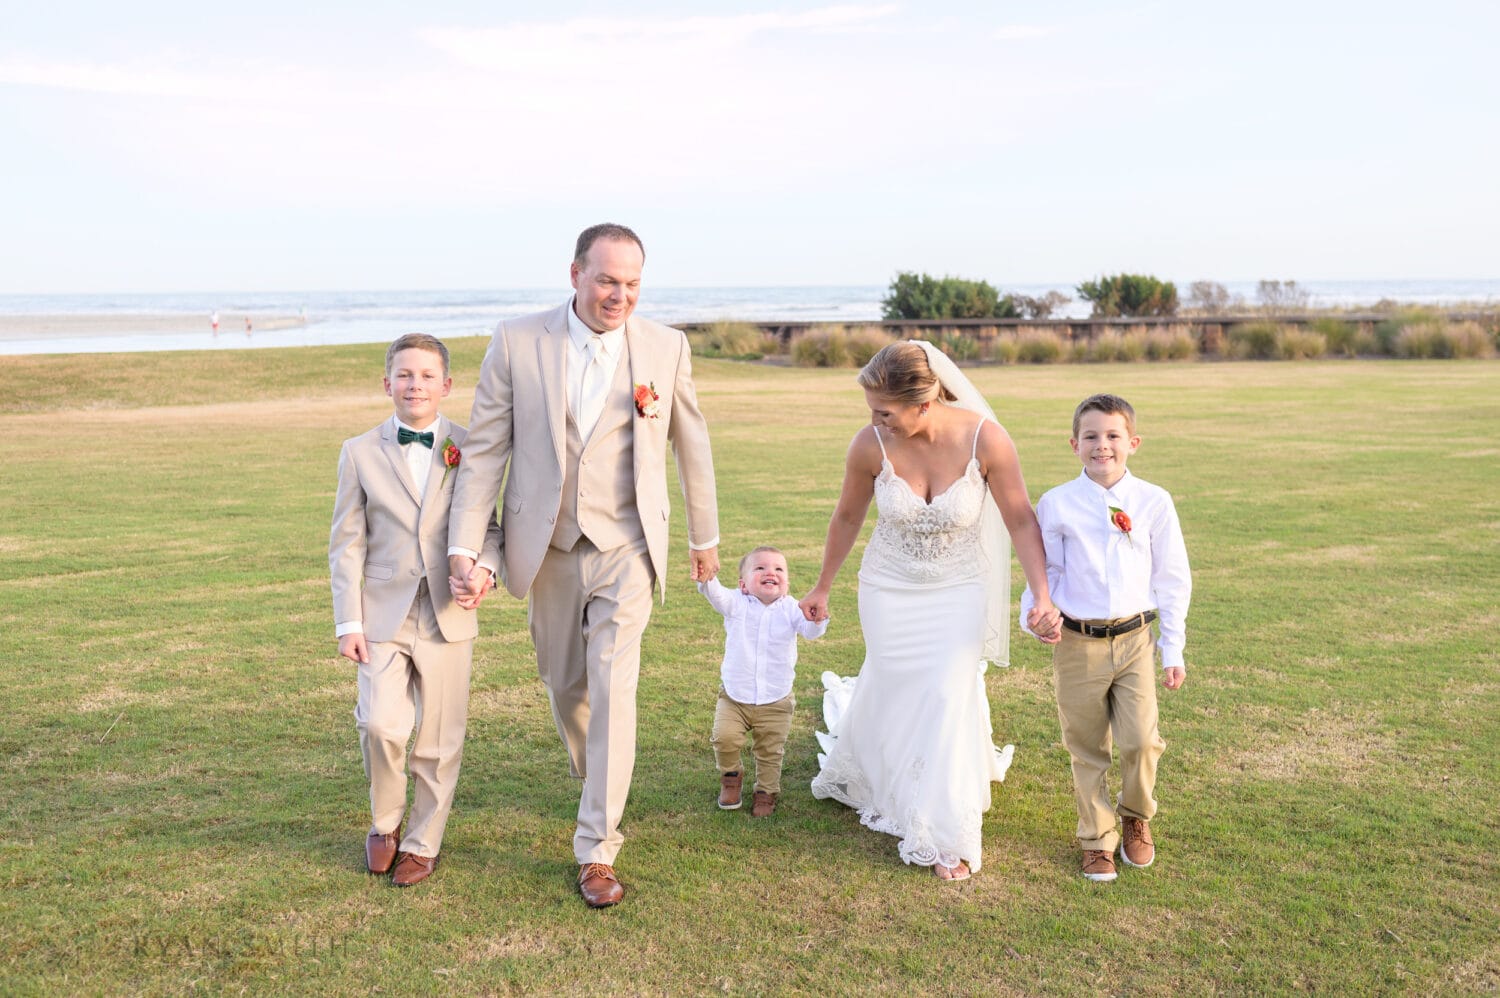 Bride and groom walking together with their kids - Dunes Golf & Beach Club